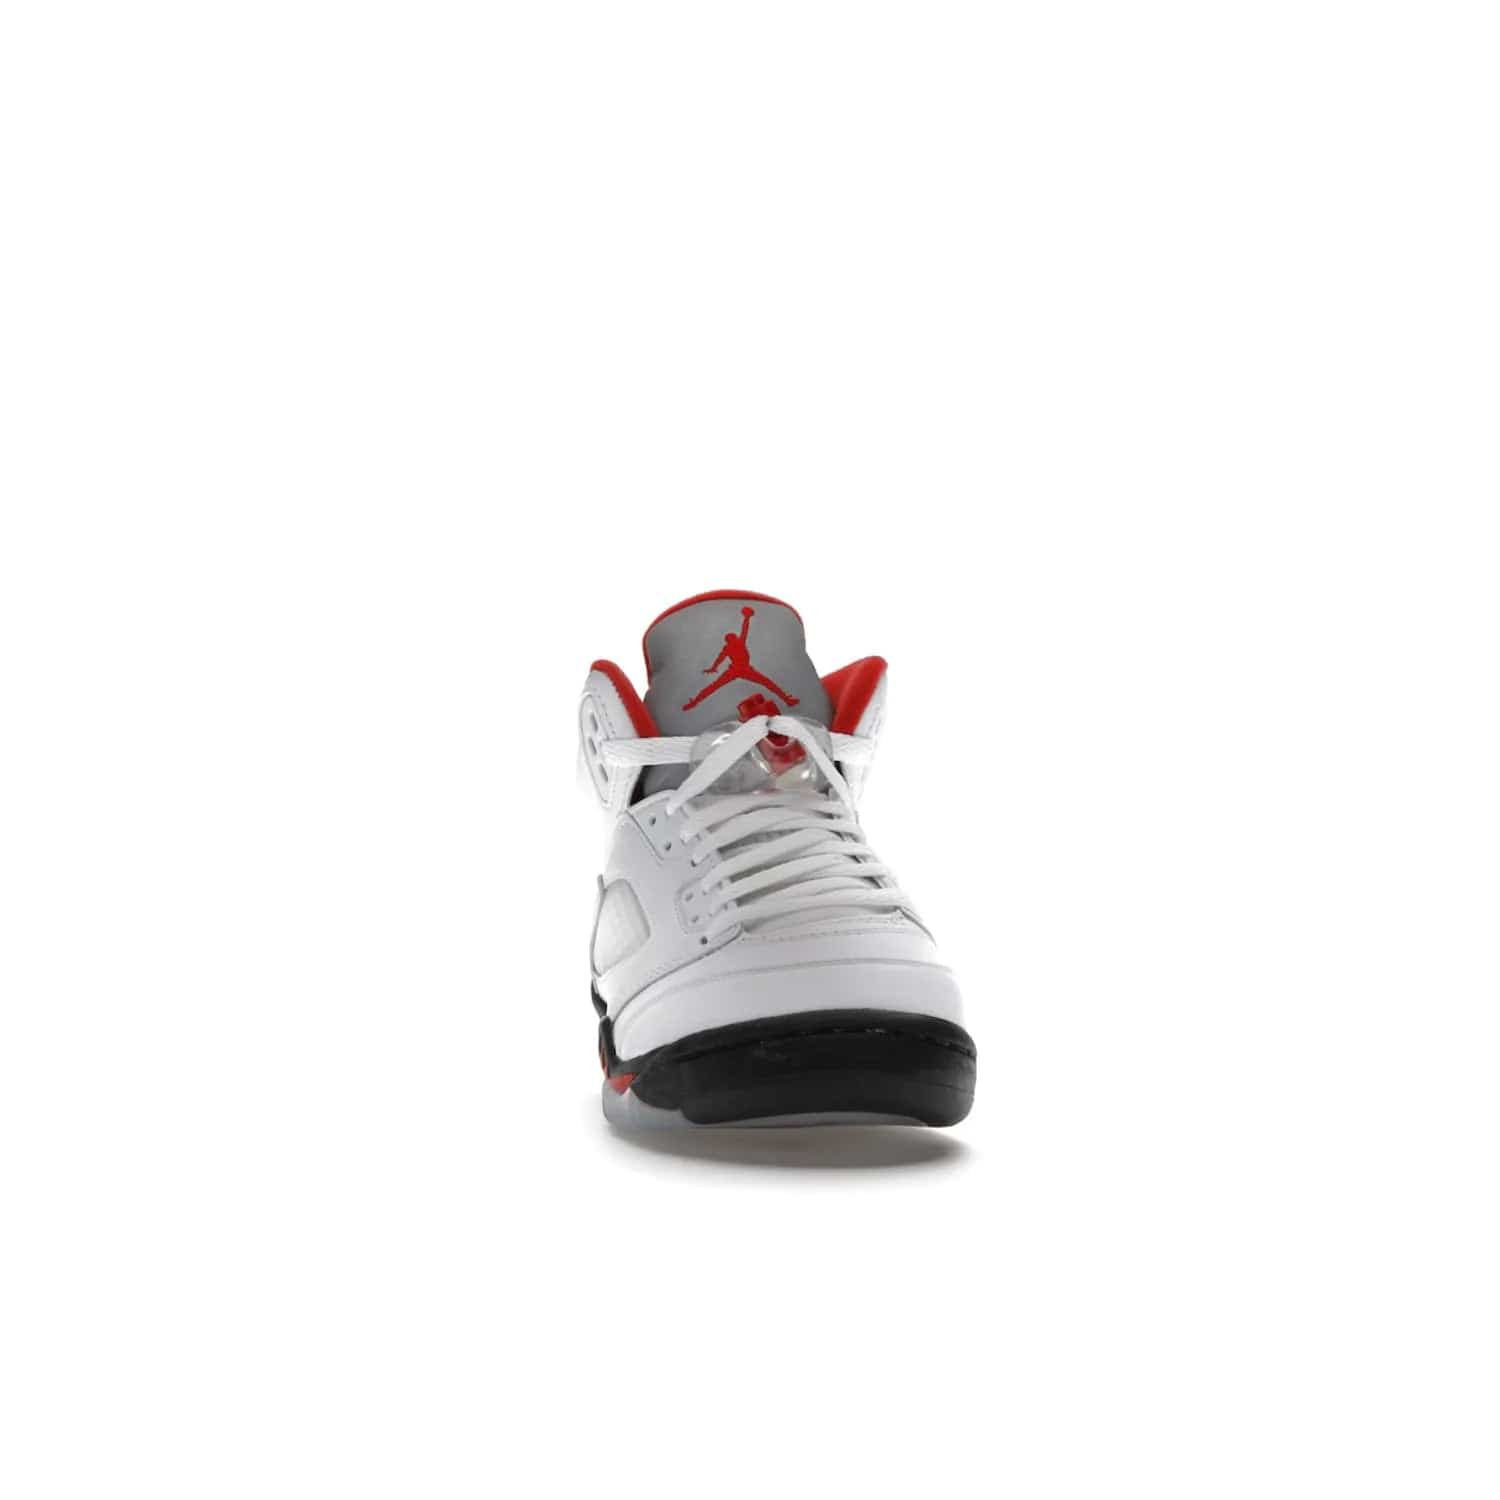 Jordan 5 Retro Fire Red Silver Tongue (2020) (GS) - Image 9 - Only at www.BallersClubKickz.com - A stylish option for any grade schooler. The Air Jordan 5 Retro Fire Red Silver Tongue 2020 GS features a combination of four hues, premium white leather, a clear mesh mid-upper and a reflective silver tongue. An icy translucent blue outsole completes the look. Available on May 2, $150.